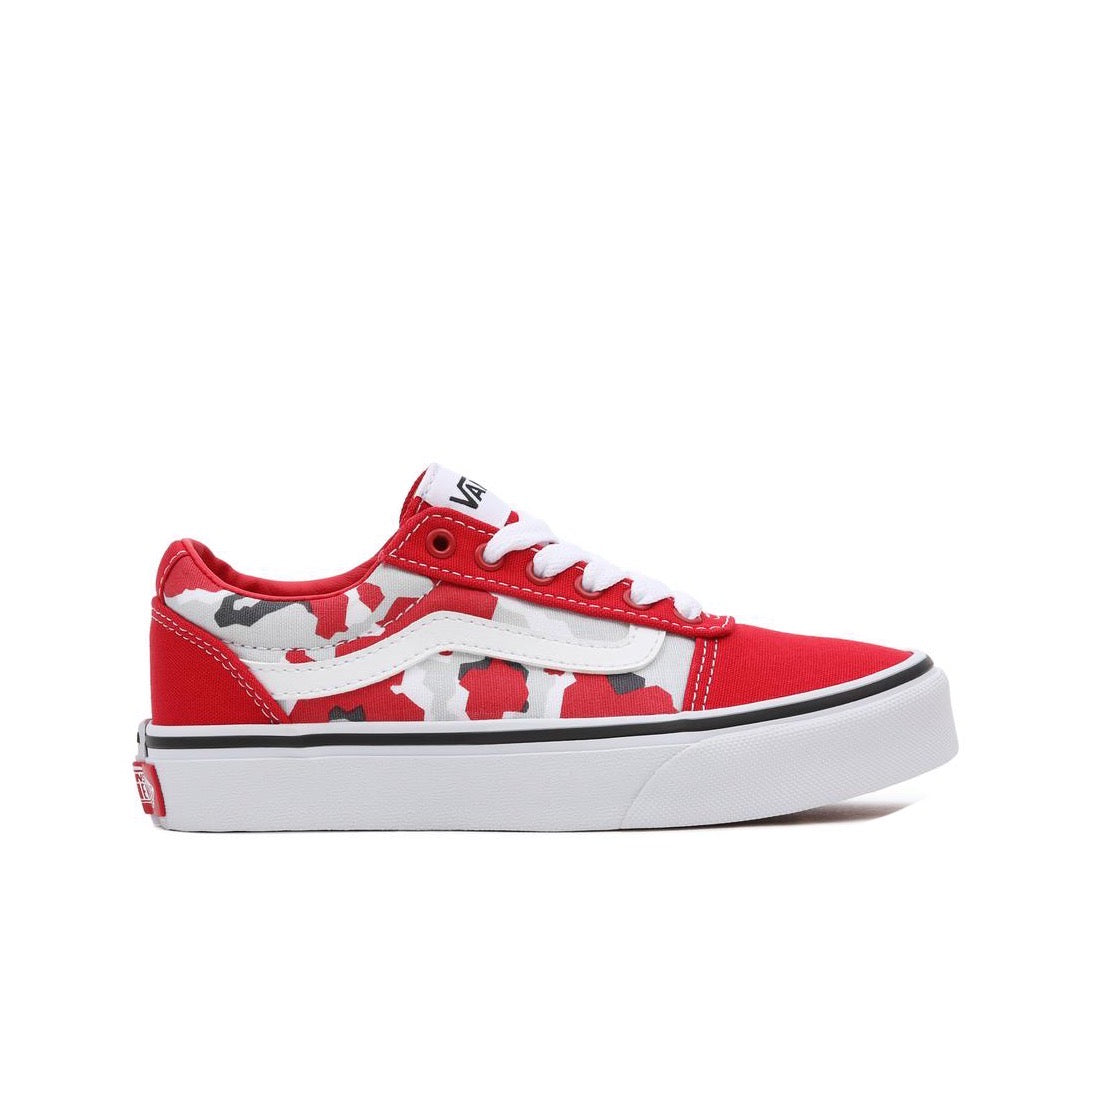 Vans Youth Ward Primary Camo Vn0a5kr6bby1 Footwear UK2 EU33 / Red,UK3 EU35 / Red,UK4 EU36.5 / Red,UK5 EU38 / Red,UK6 EU39 / Red